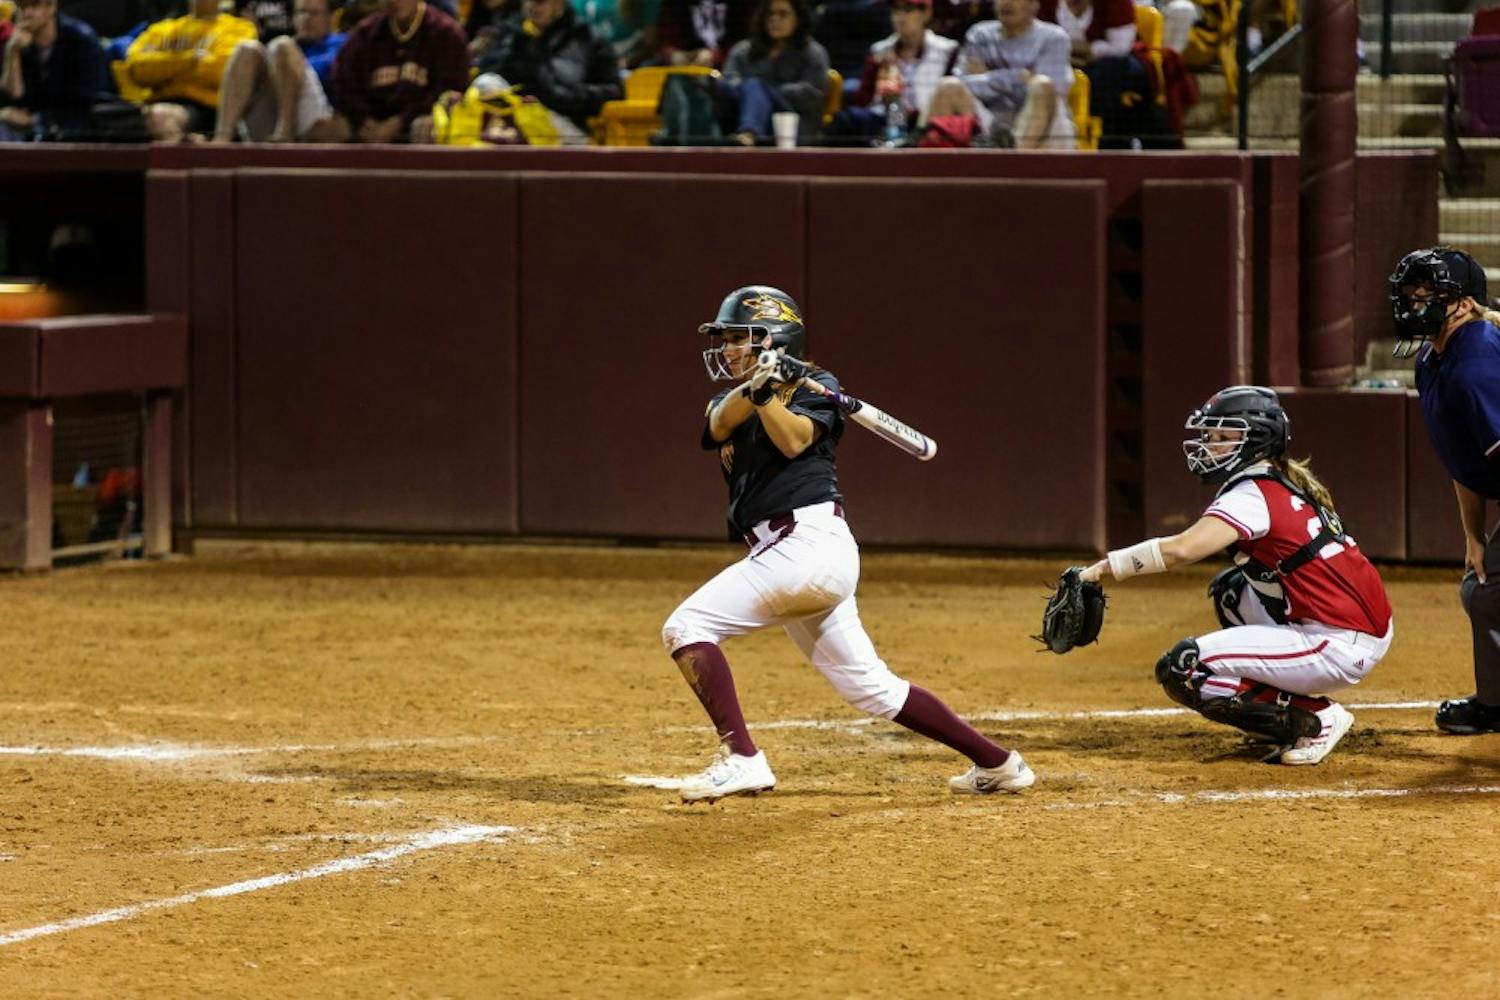 ASU sophomore shortstop Chelsea Gonzalez follows through after hitting a single vs. Indiana softball at Farrington Stadium on Feb. 7, 2015. Gonzalez’s hit would be part of a massive 6-run inning for the Sun Devils as they romped over the visiting Hoosiers 10-2. (Daniel Kwon/ The State Press)